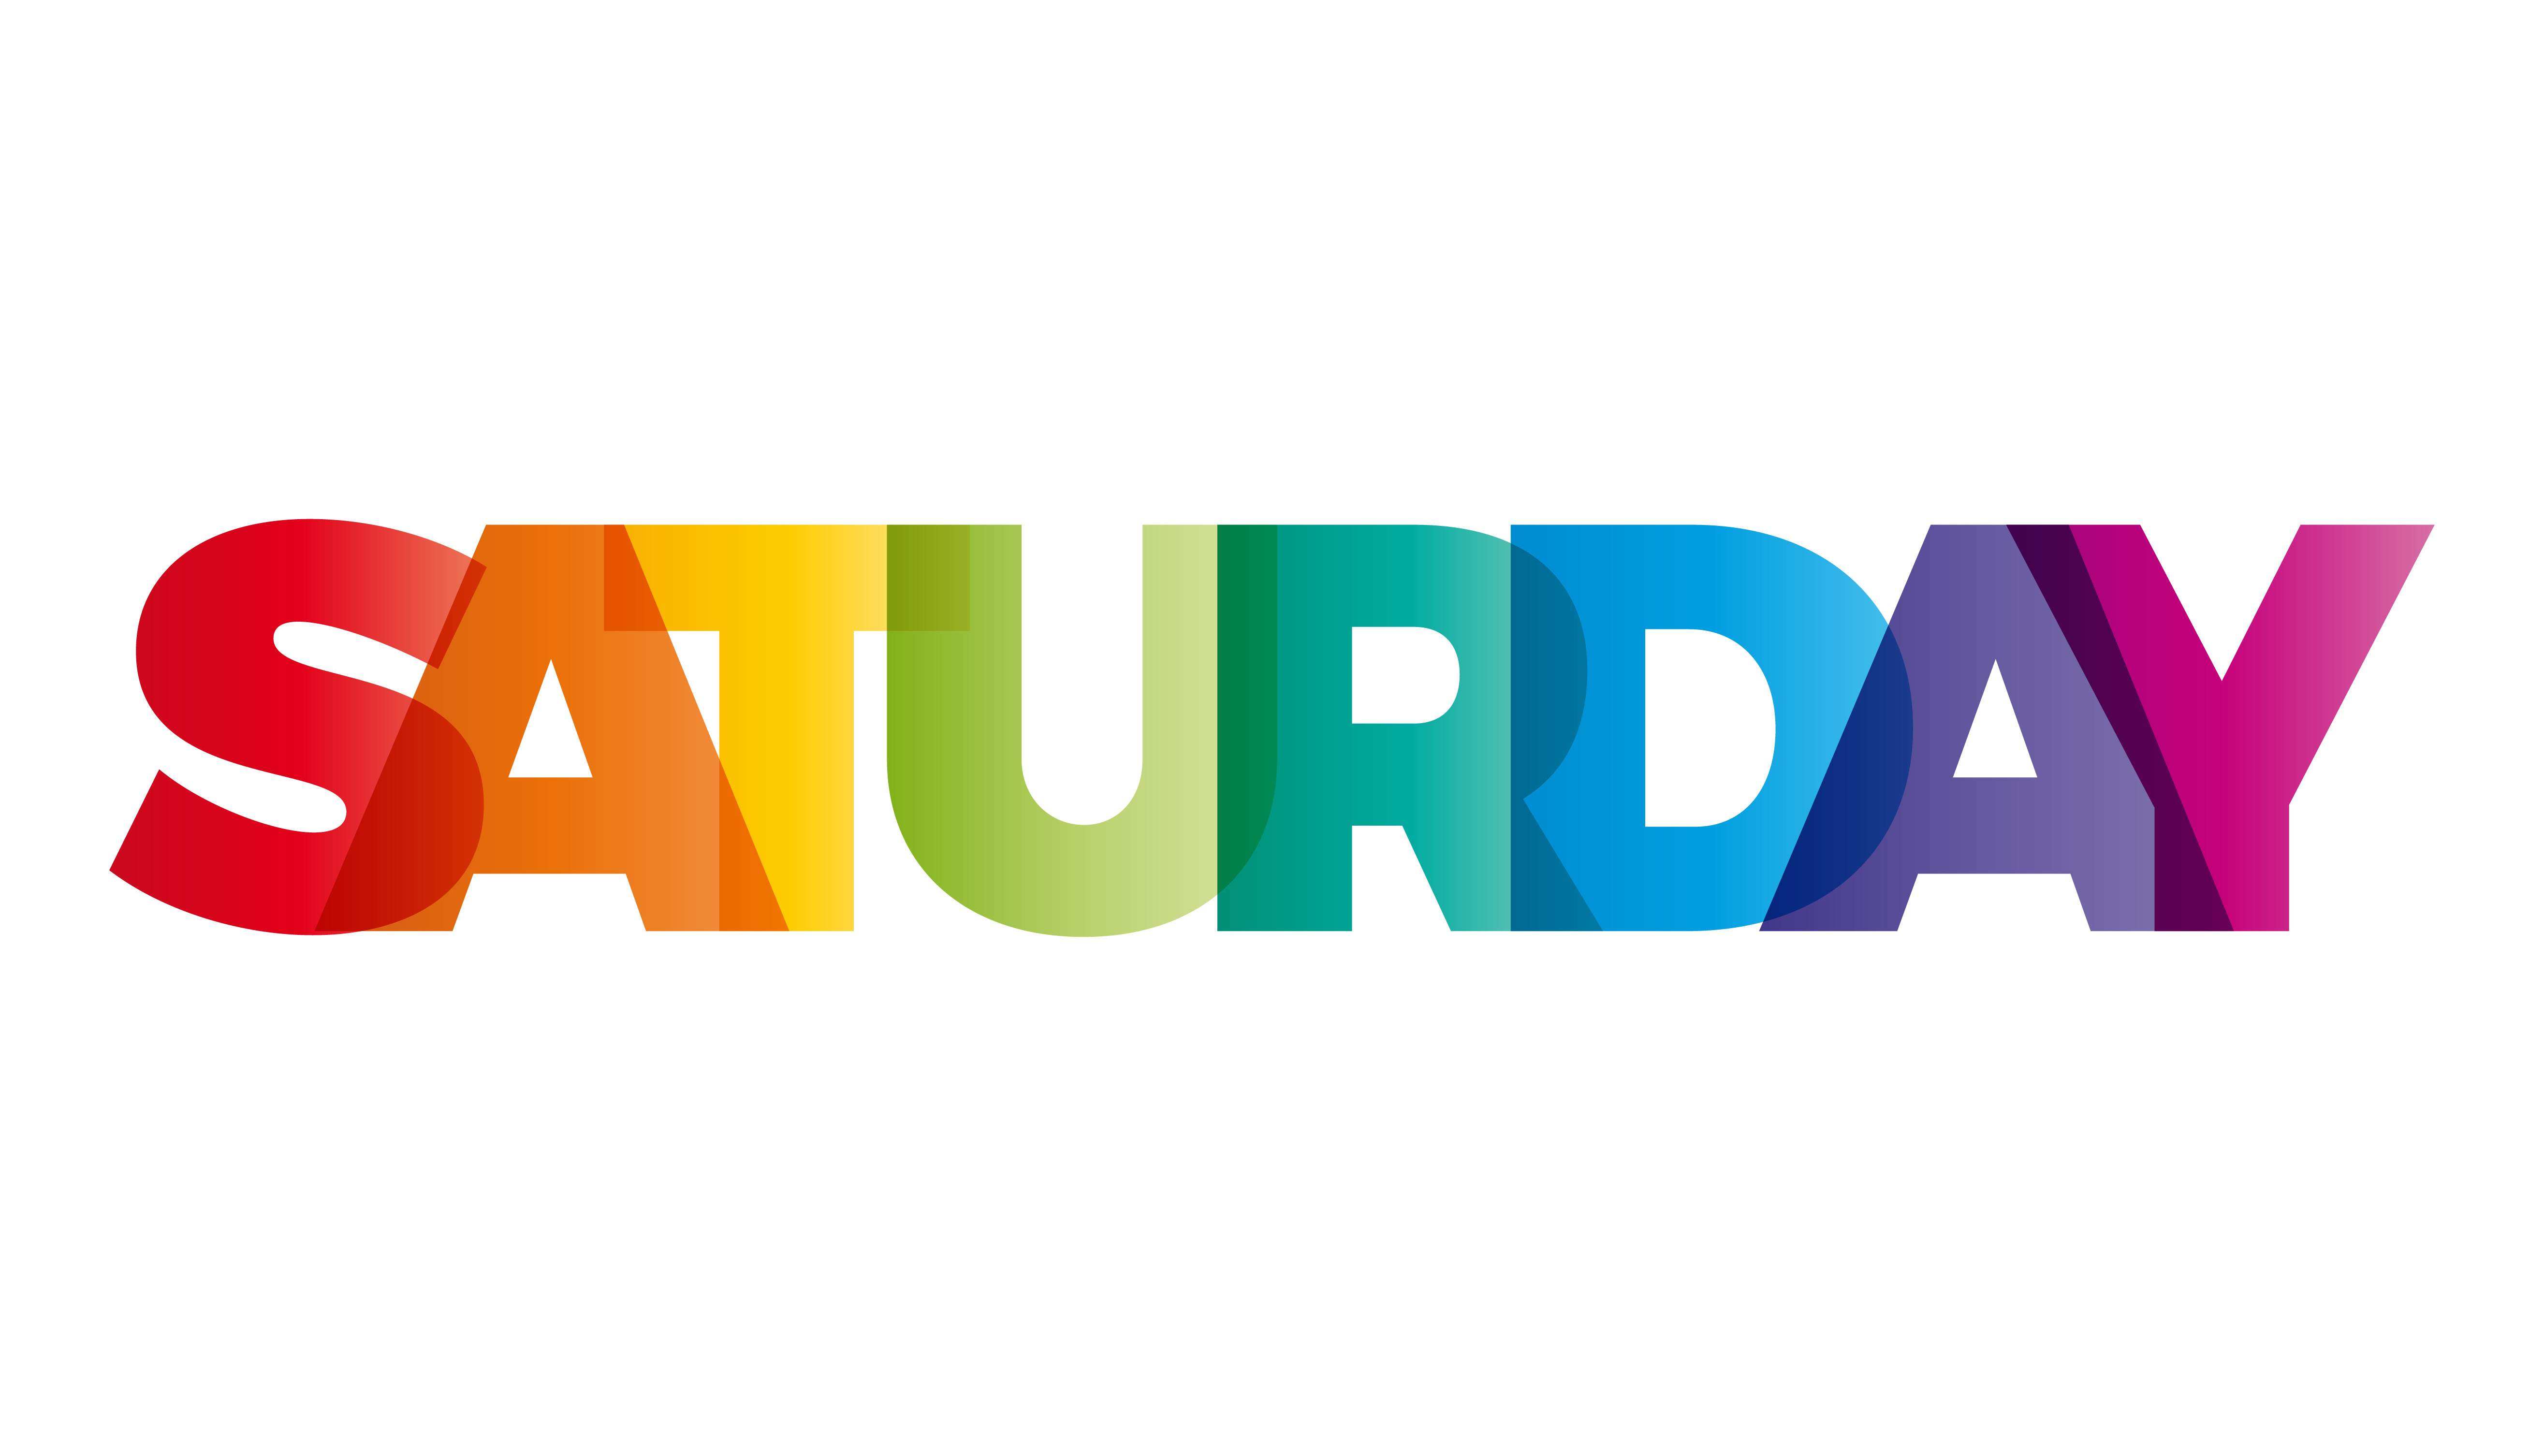 The word Saturday. Vector banner with the text colored rainbow. The